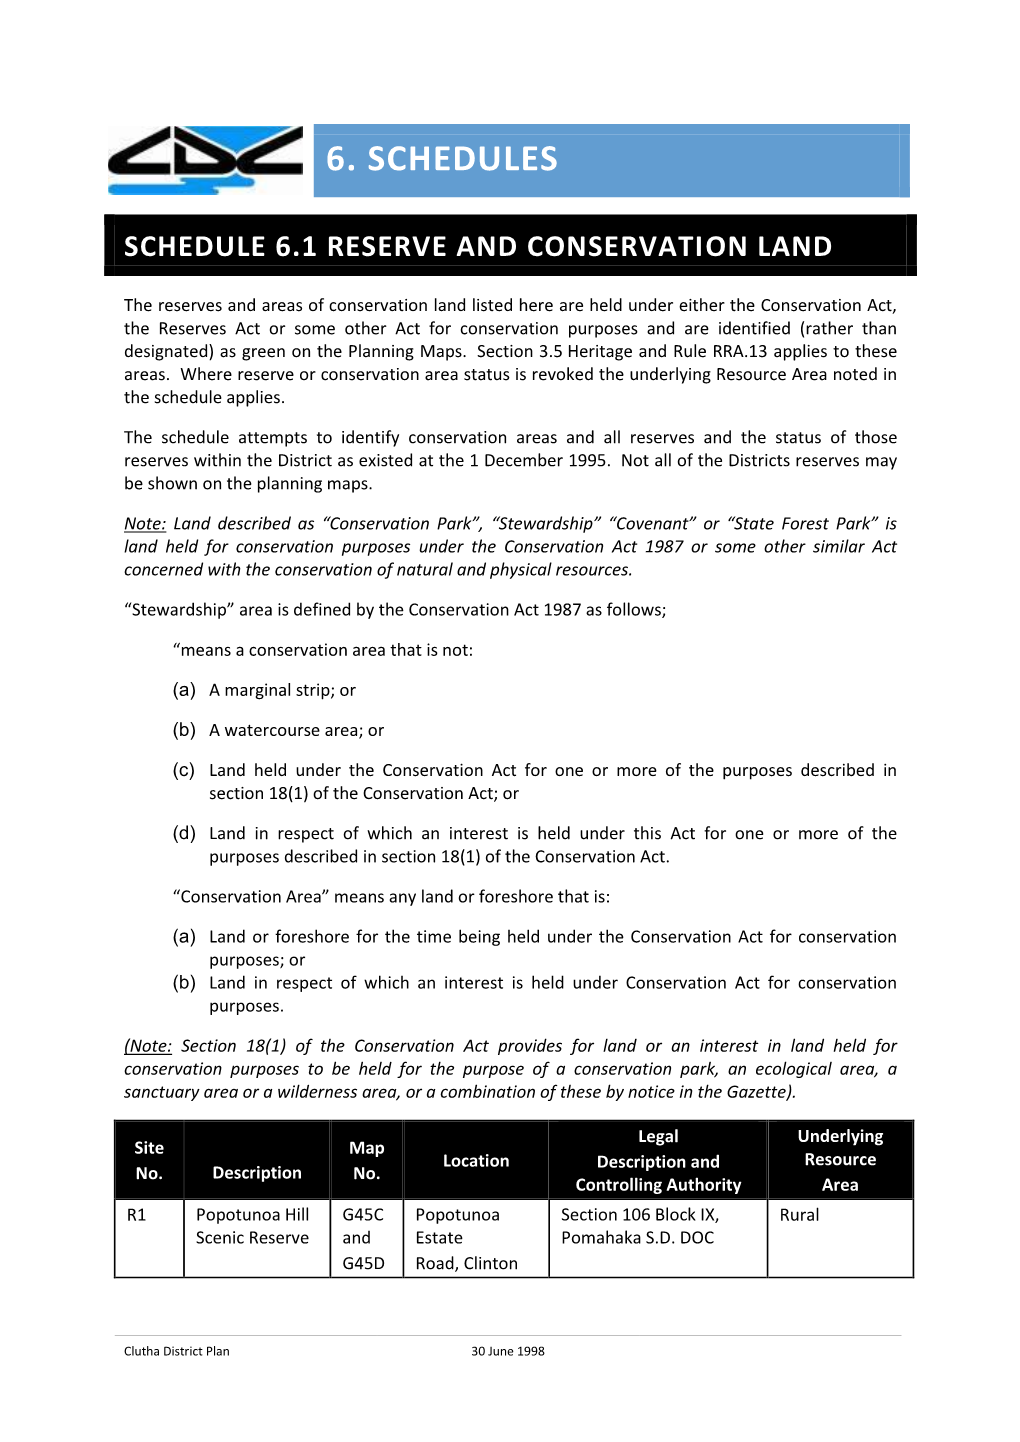 Schedule 6.1 Reserve and Conservation Land